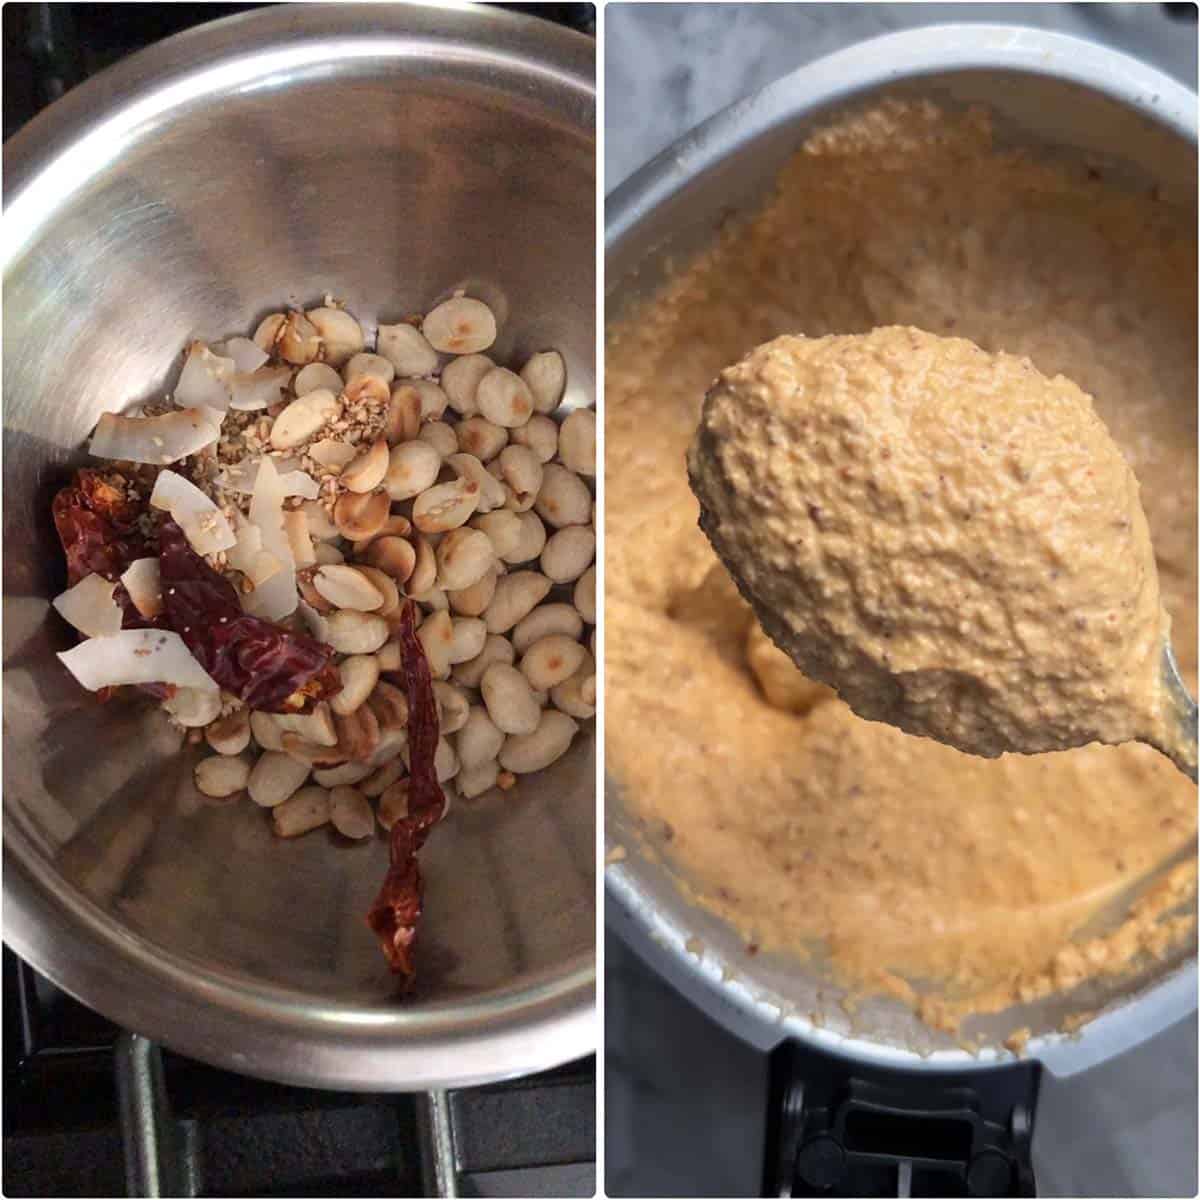 2 panel photo showing the sautéing of peanuts and ingredients and ground to a paste.